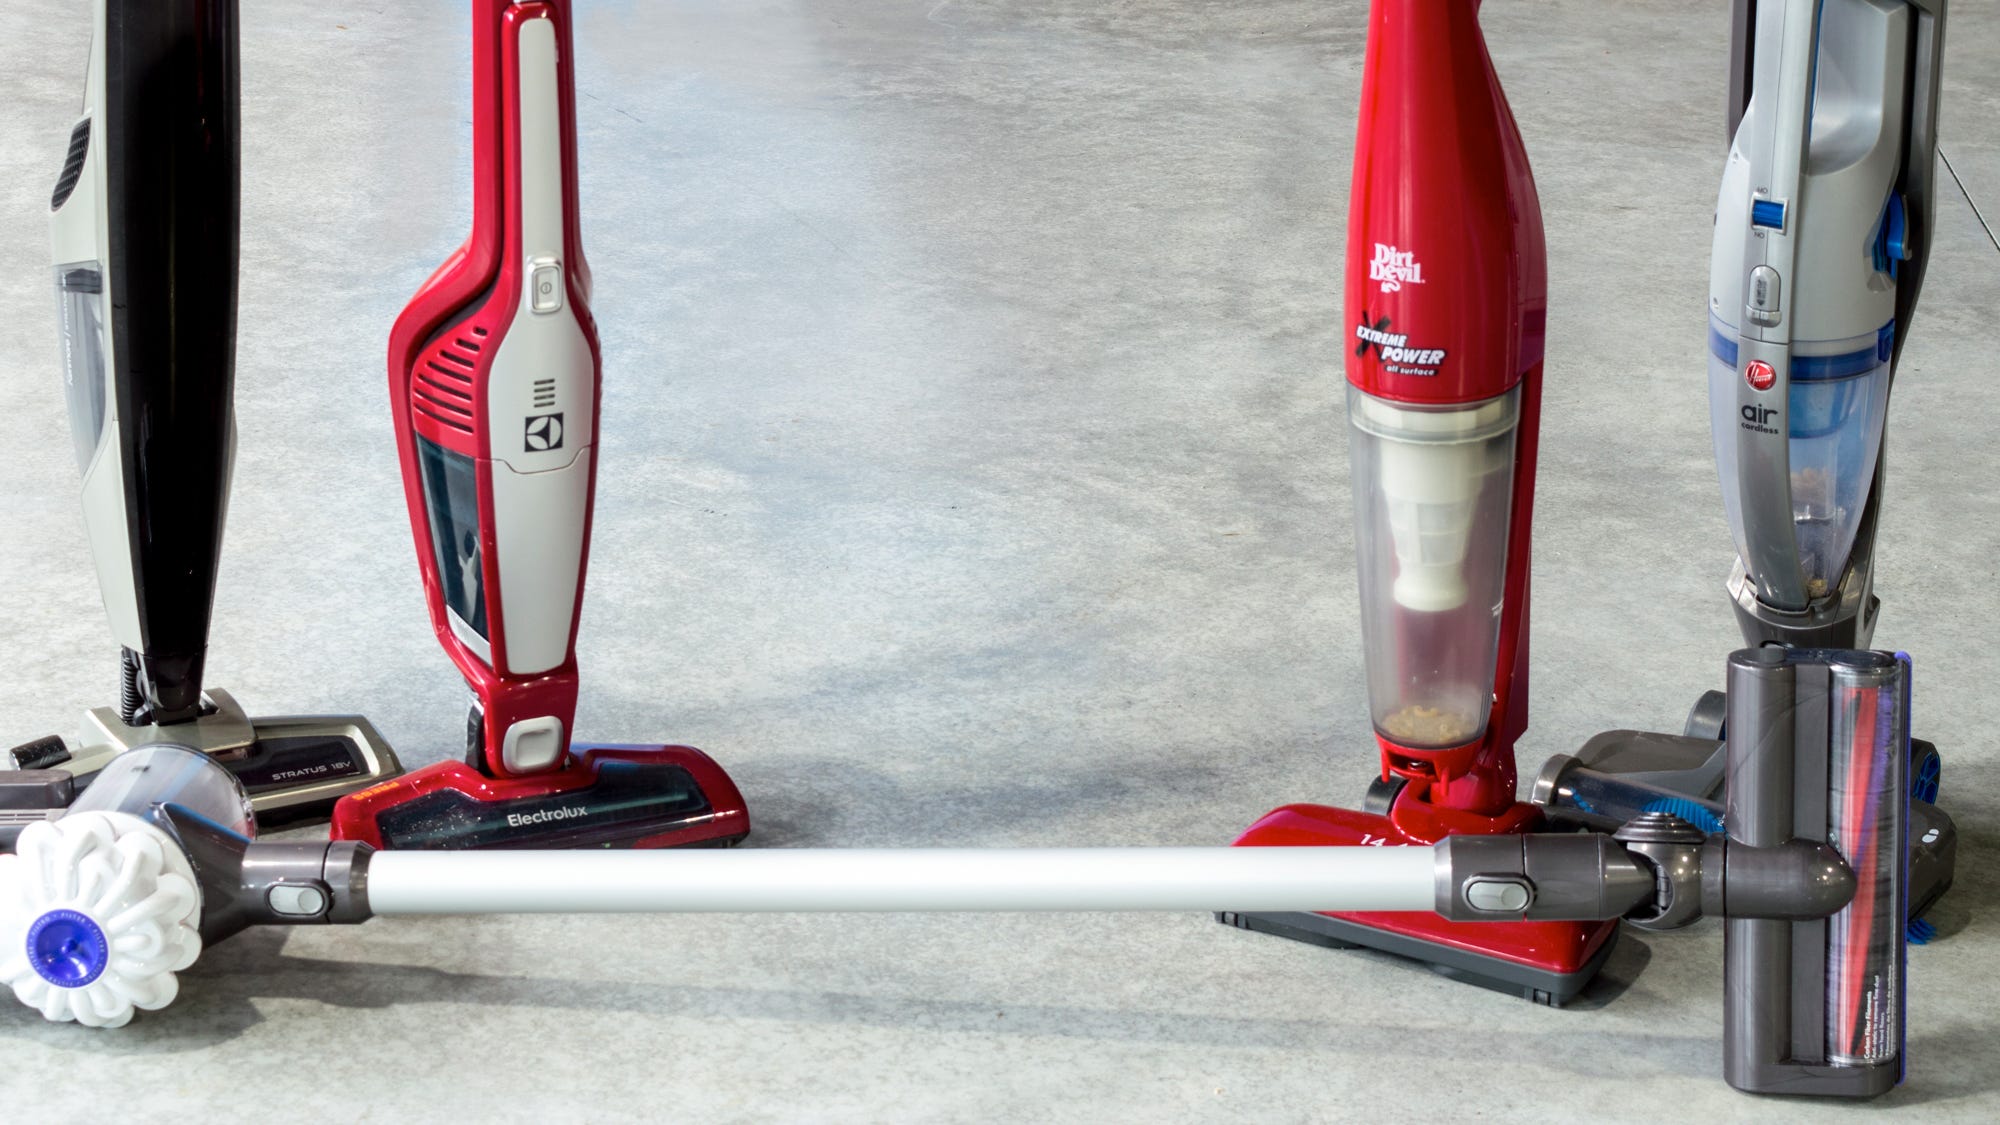 The Best Cordless Vacuums Of 2020, Best Cordless Stick Vacuum For Hardwood Floors 2020